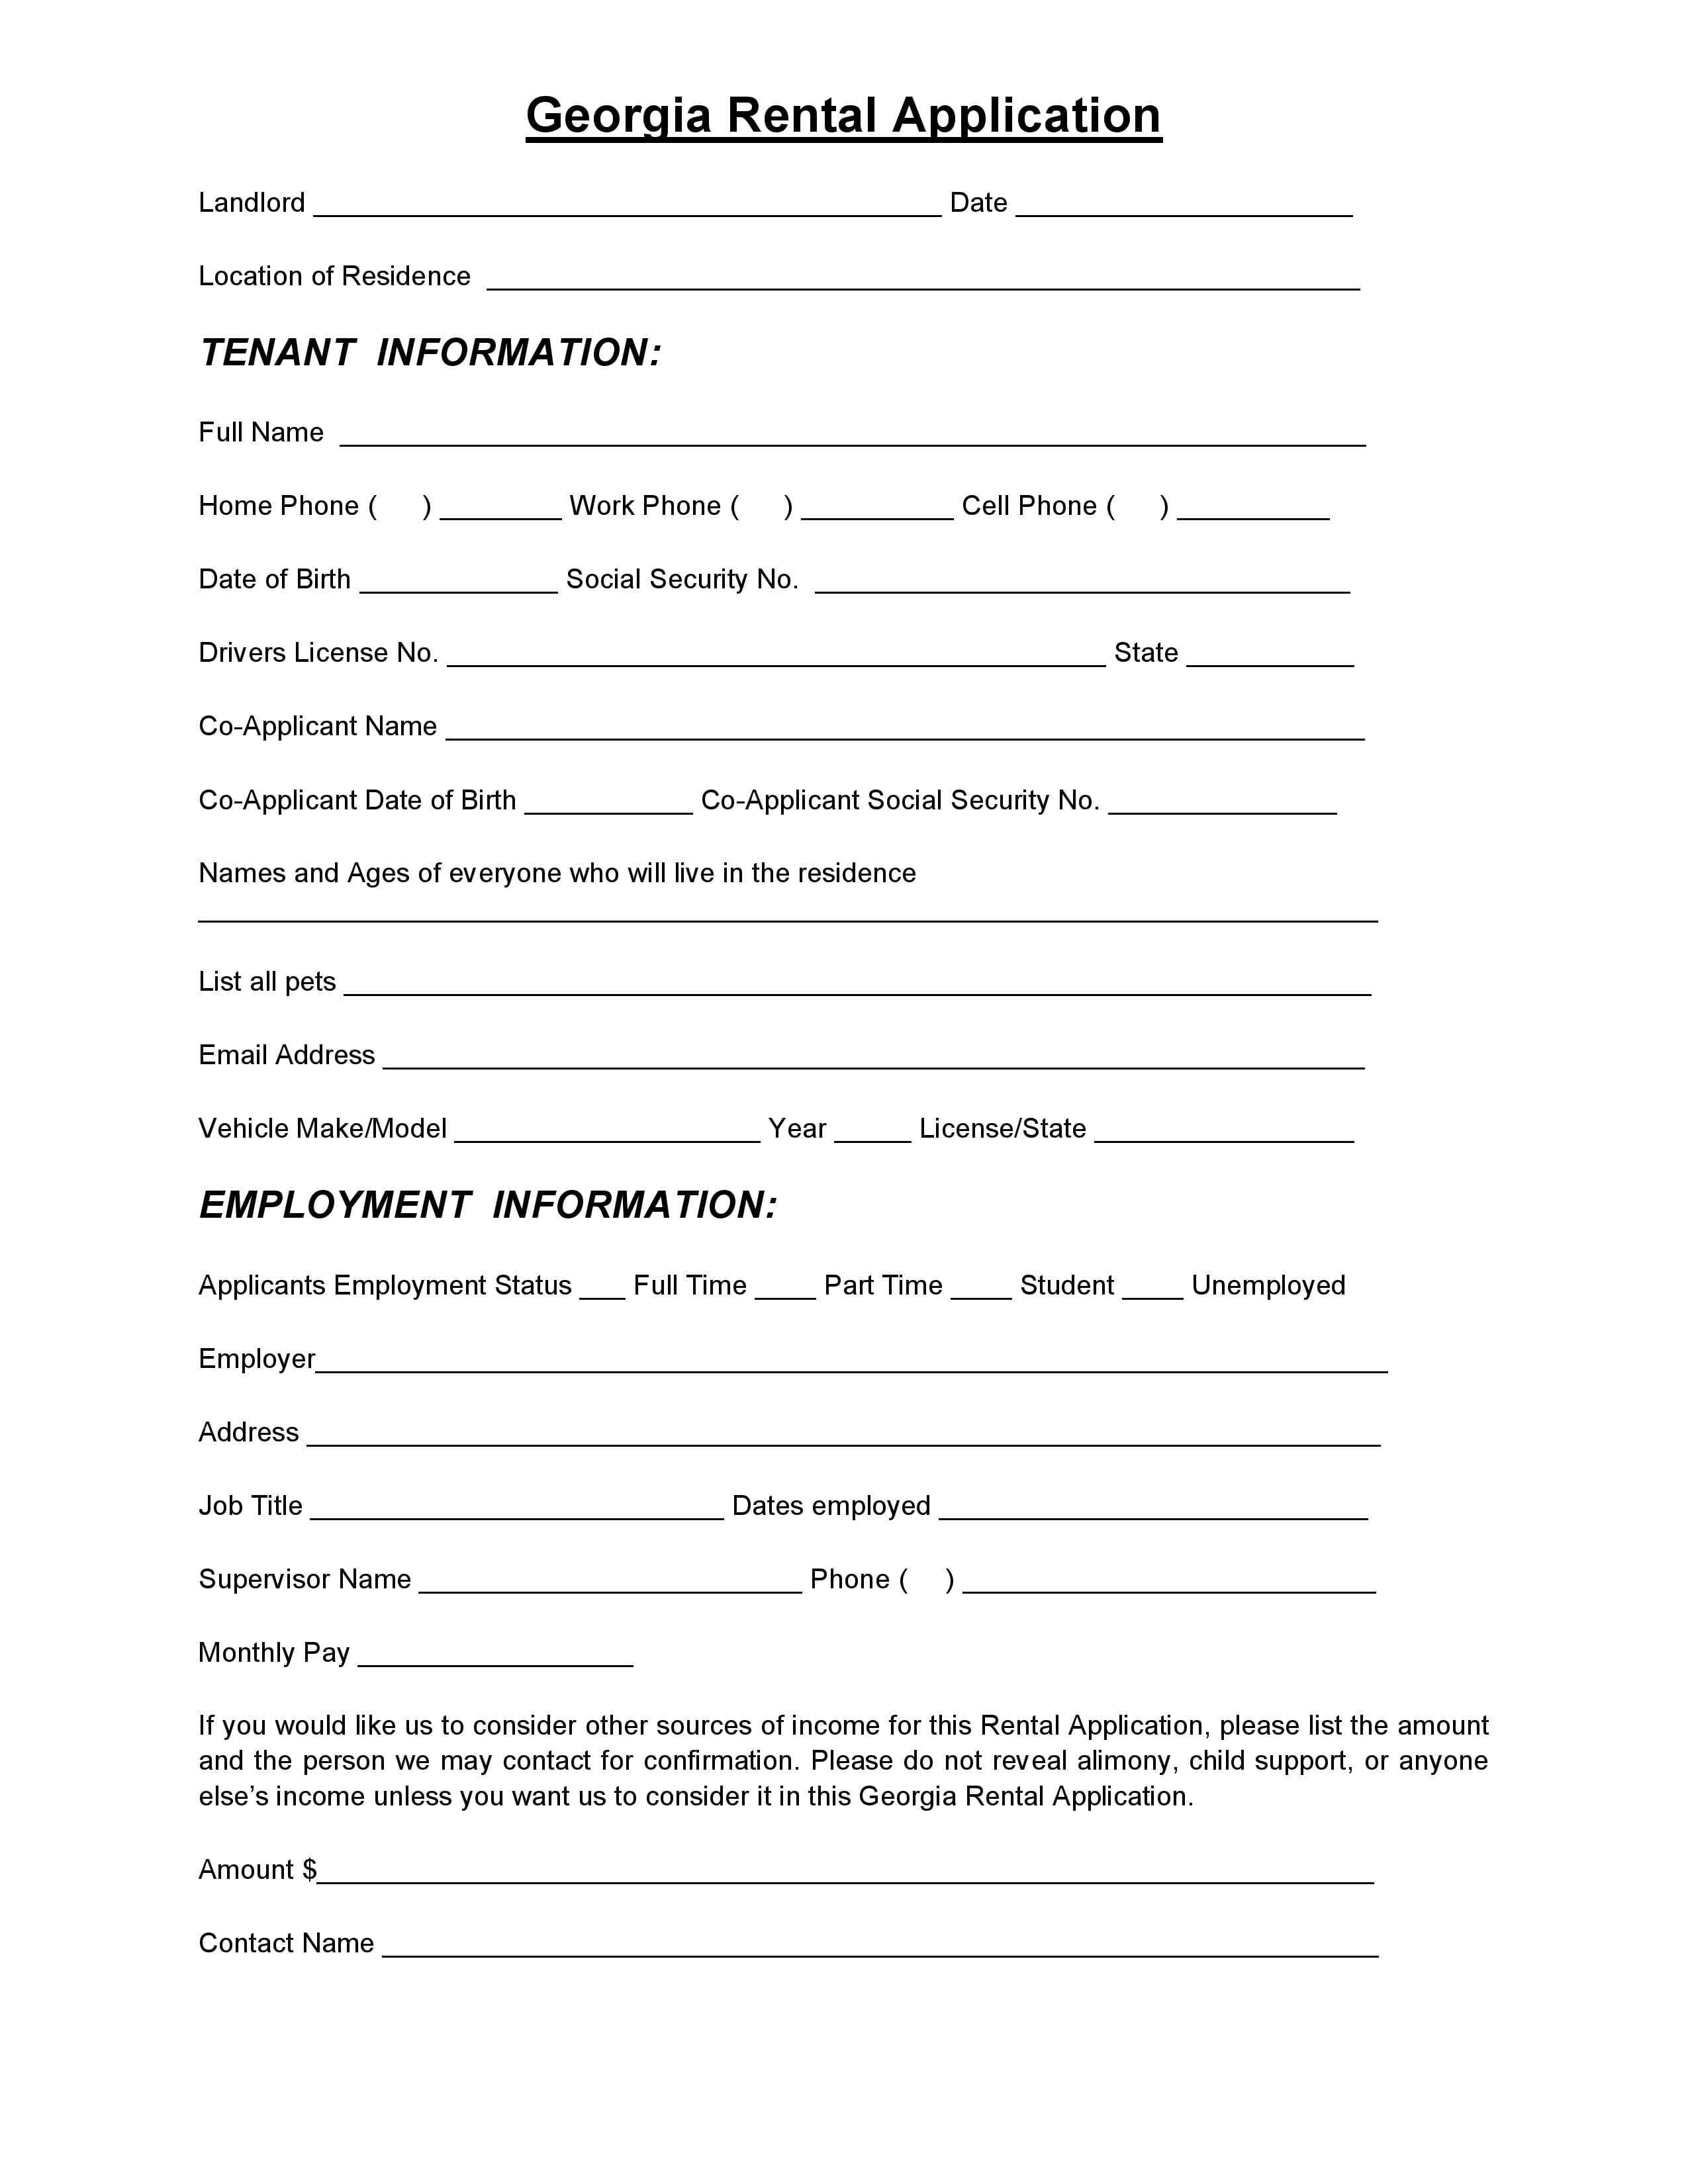 free-legal-forms-page-2-of-8-pdf-template-form-download